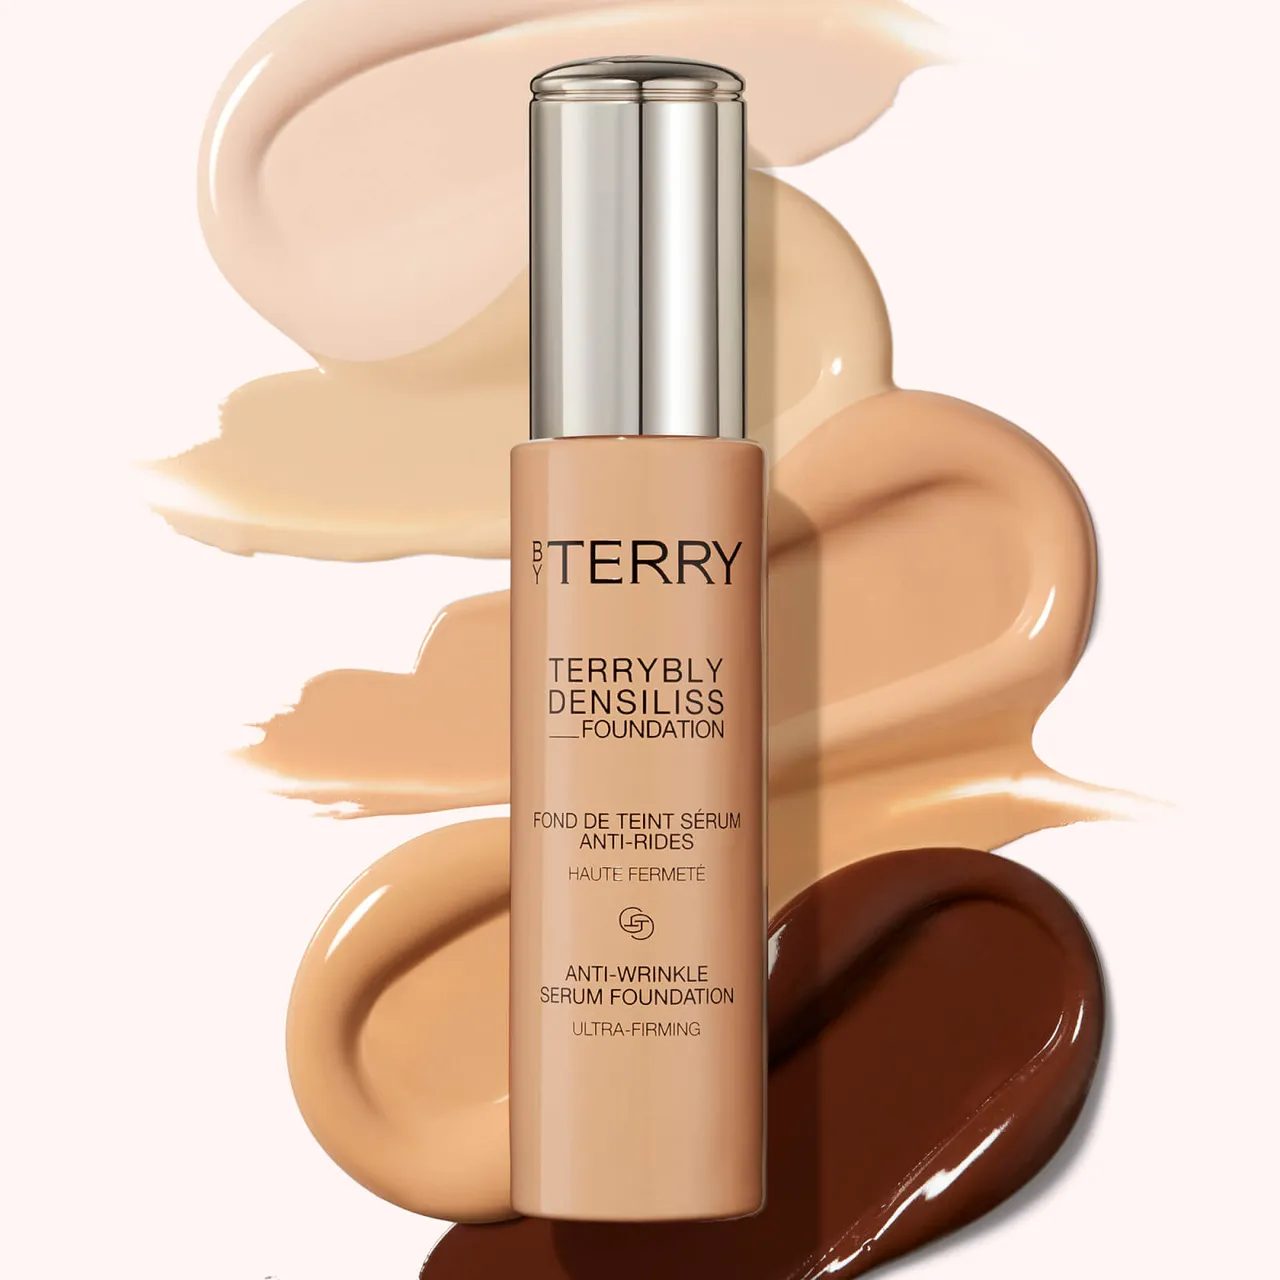 By Terry Terrybly Densiliss Foundation 30ml (Various Shades) - 7. Golden Beige